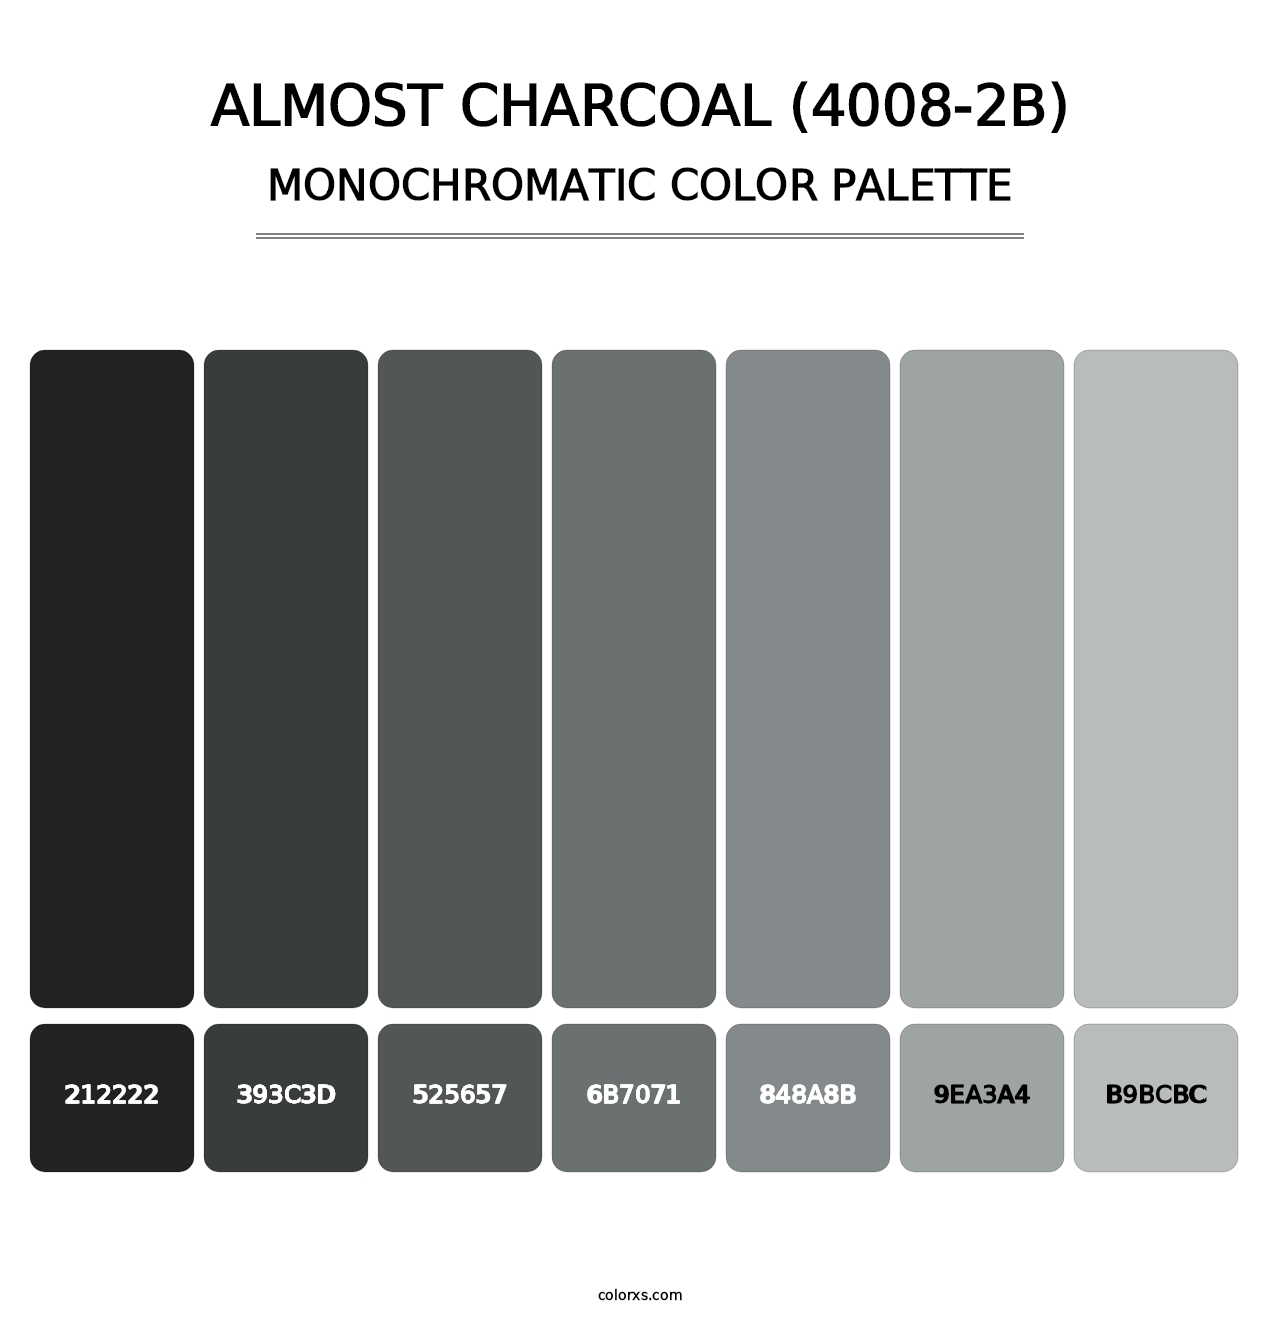 Almost Charcoal (4008-2B) - Monochromatic Color Palette